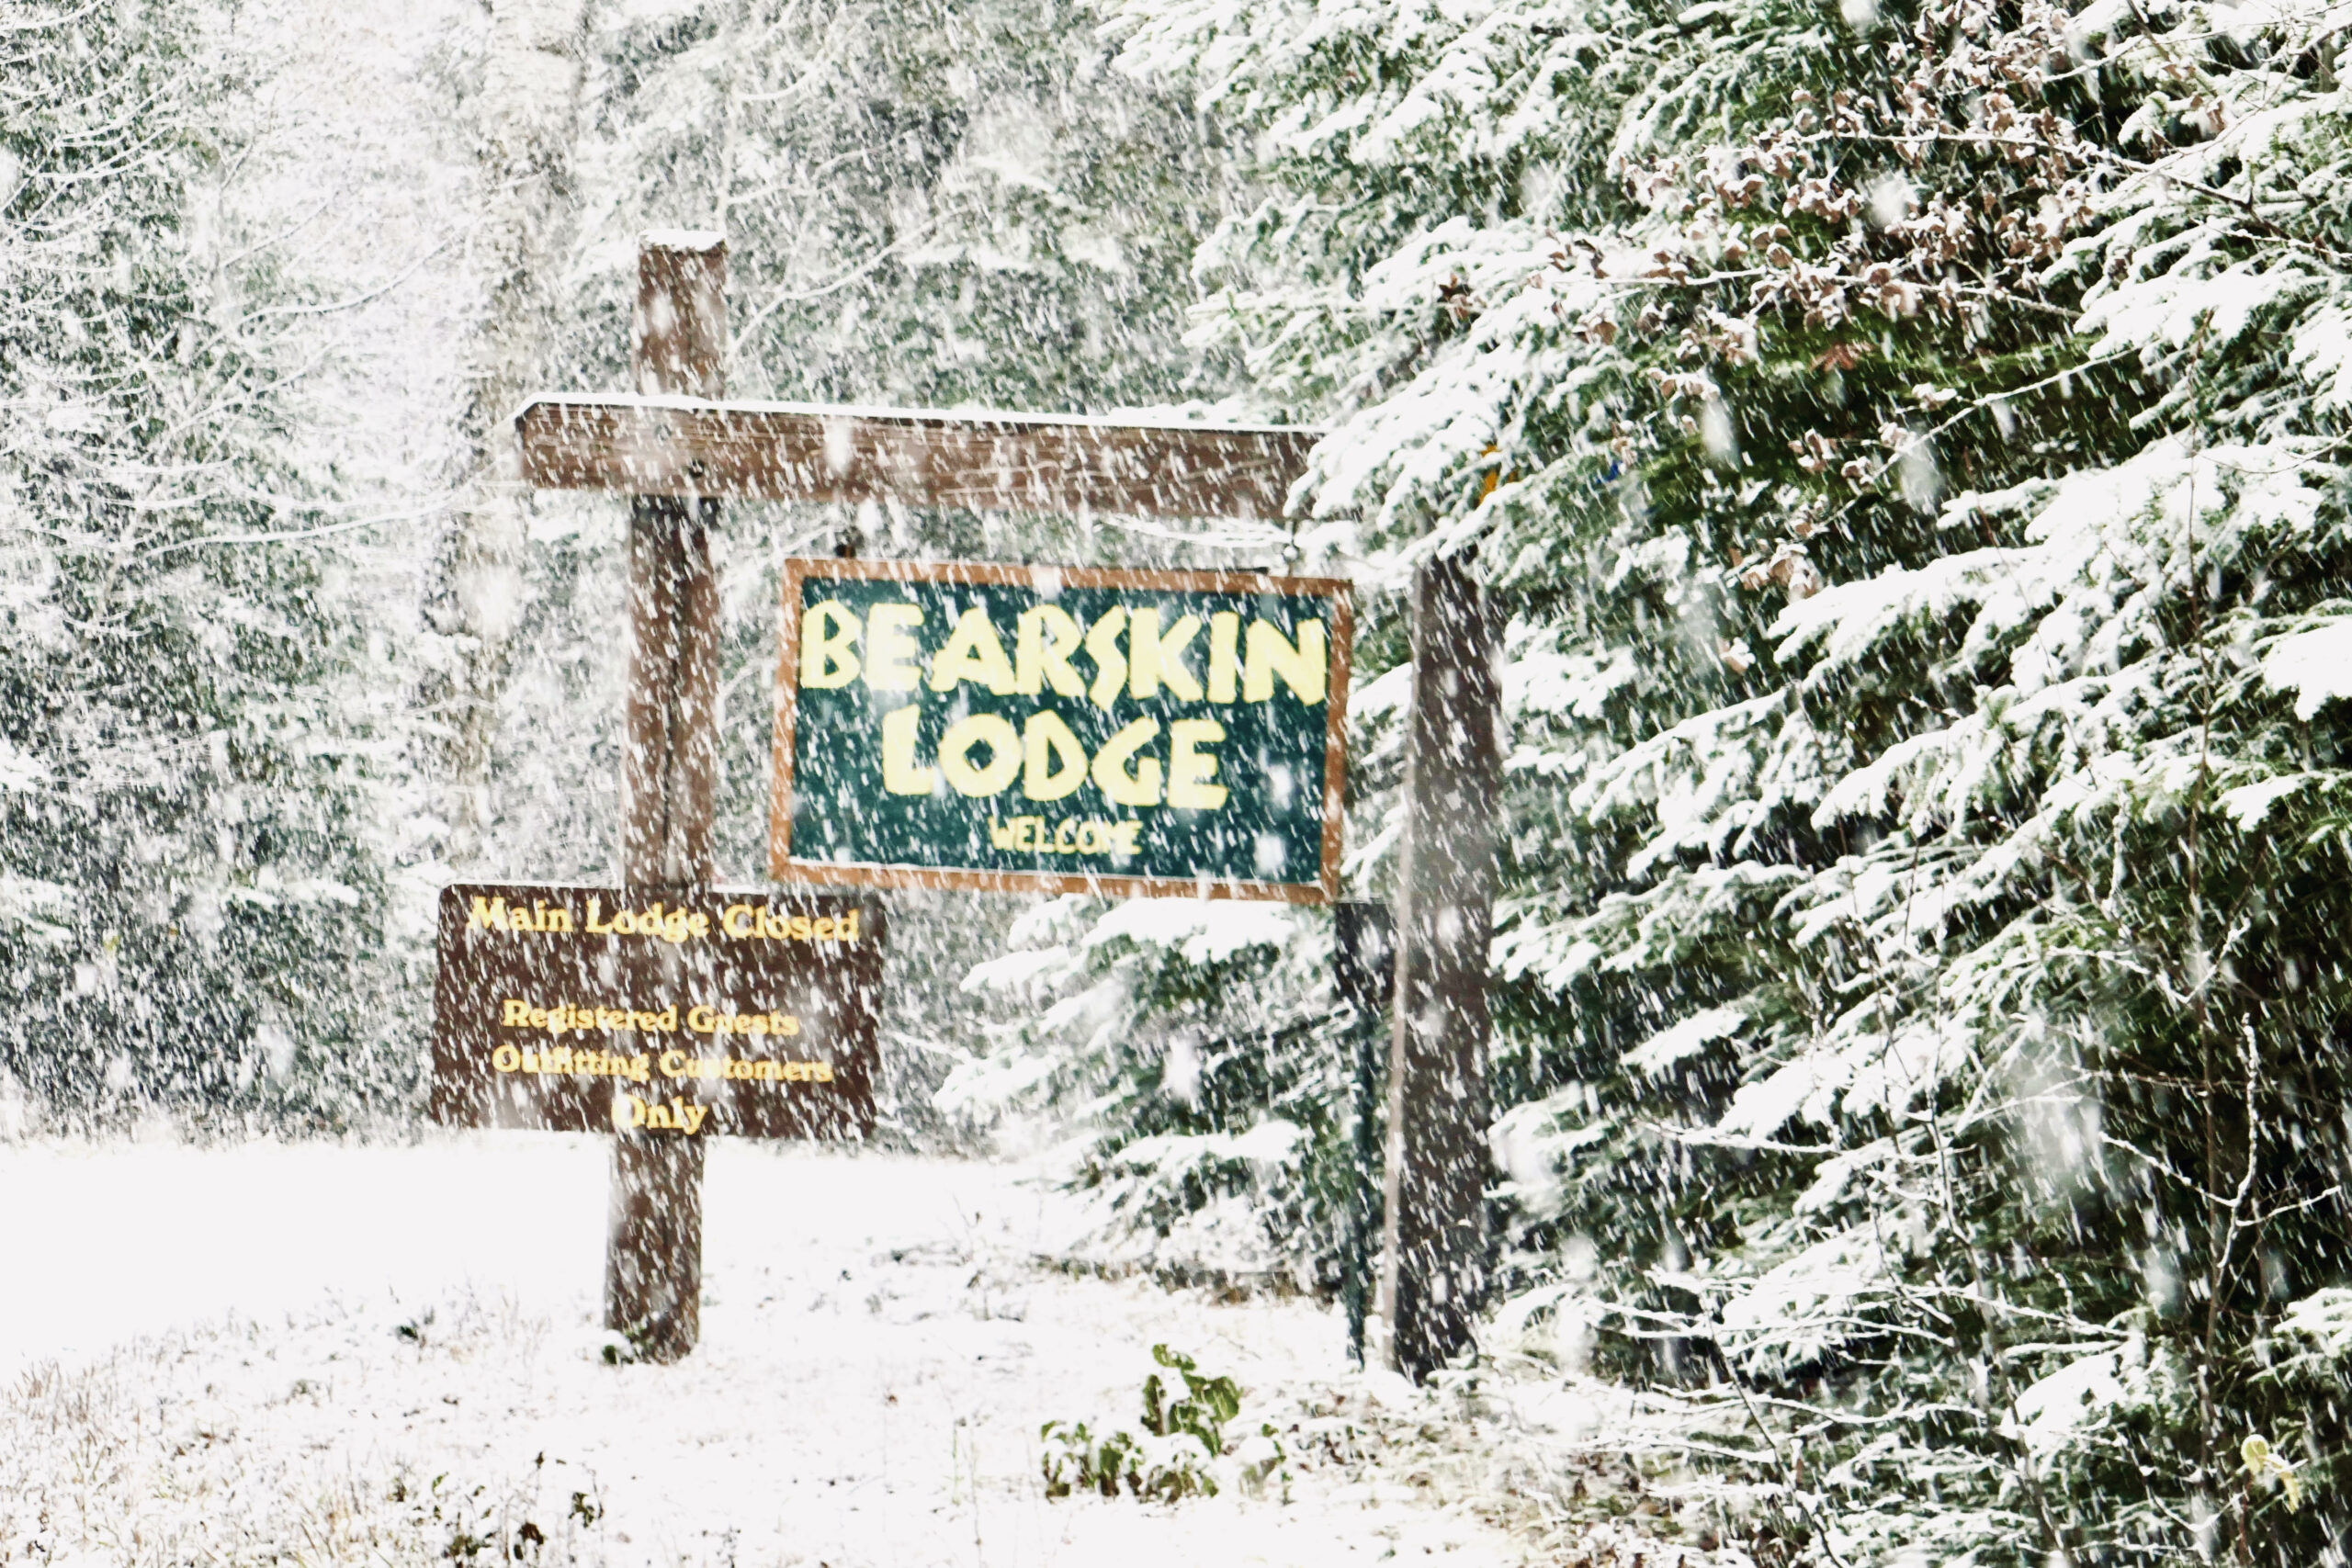 Bearskin lodge sign with heavy snow falling